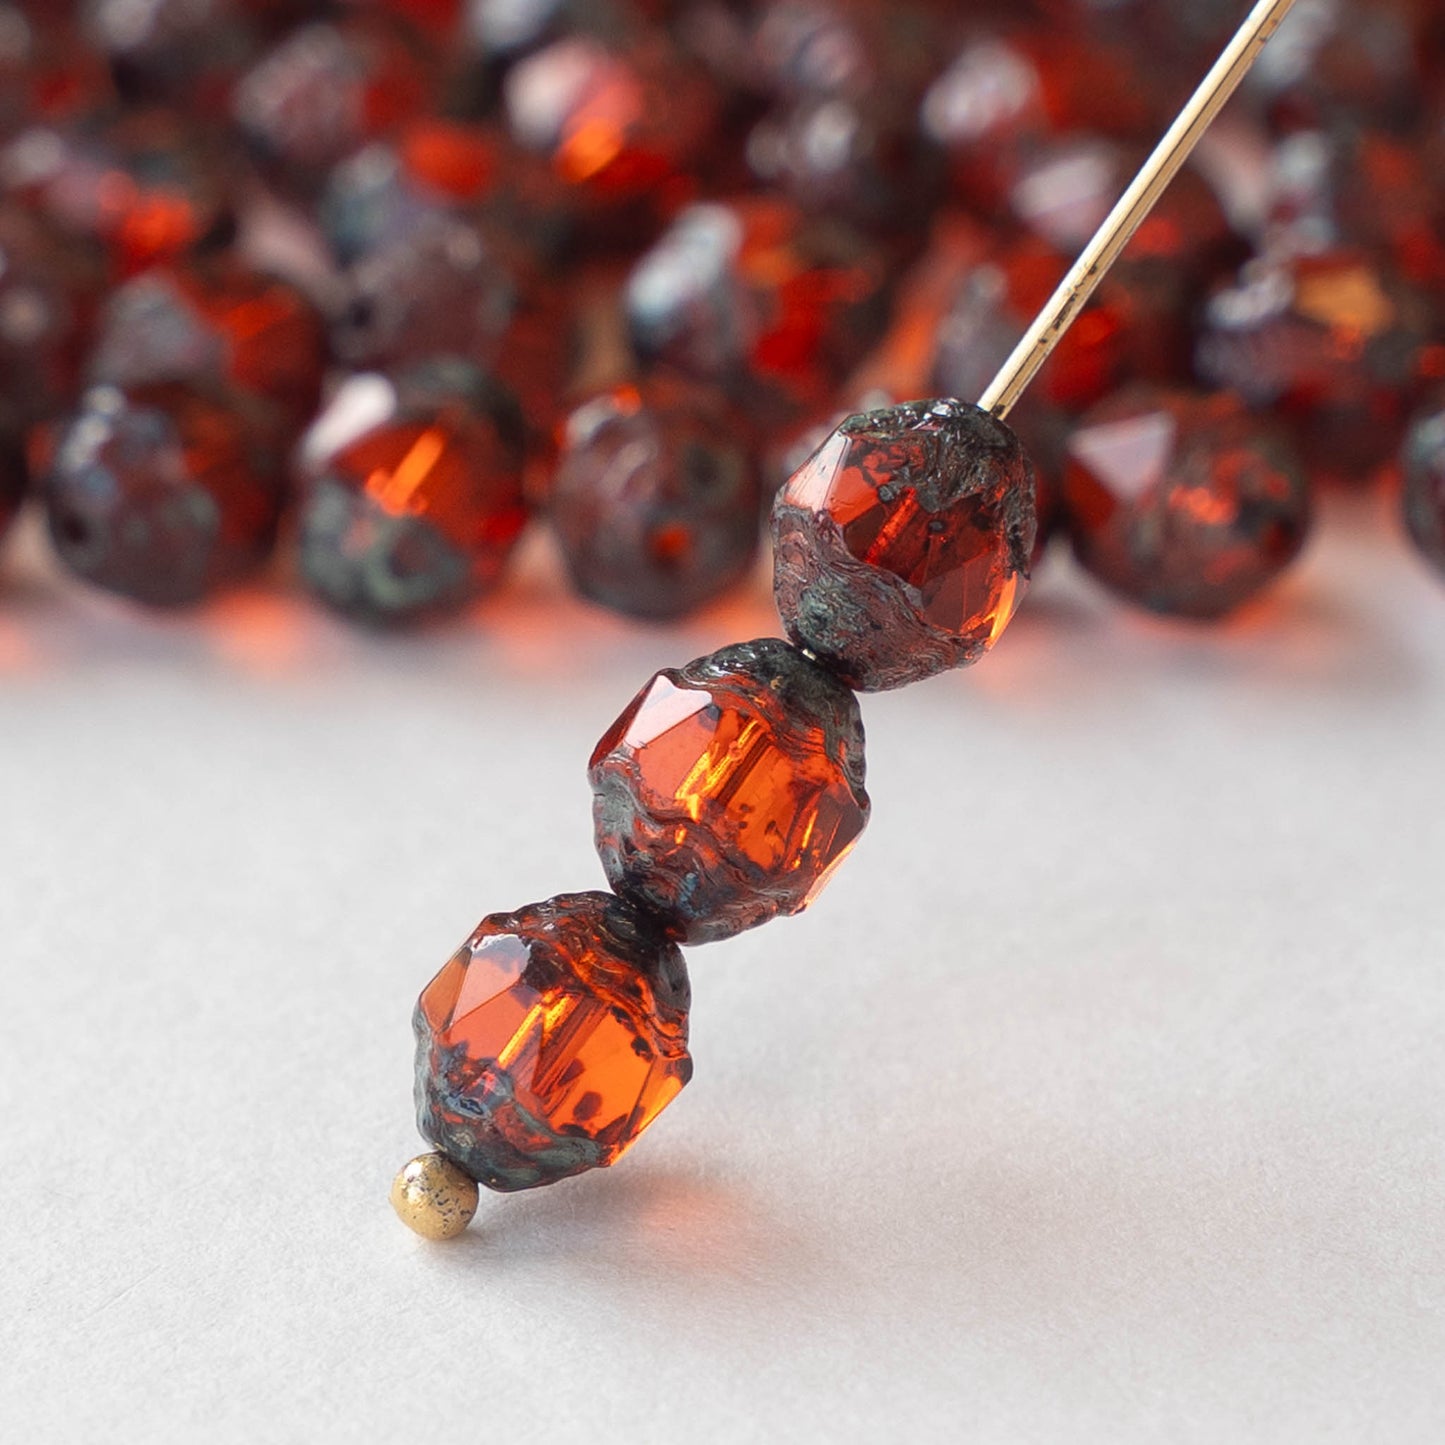 6x8mm Faceted Prop Beads - Dark Orange Picasso - 20 beads